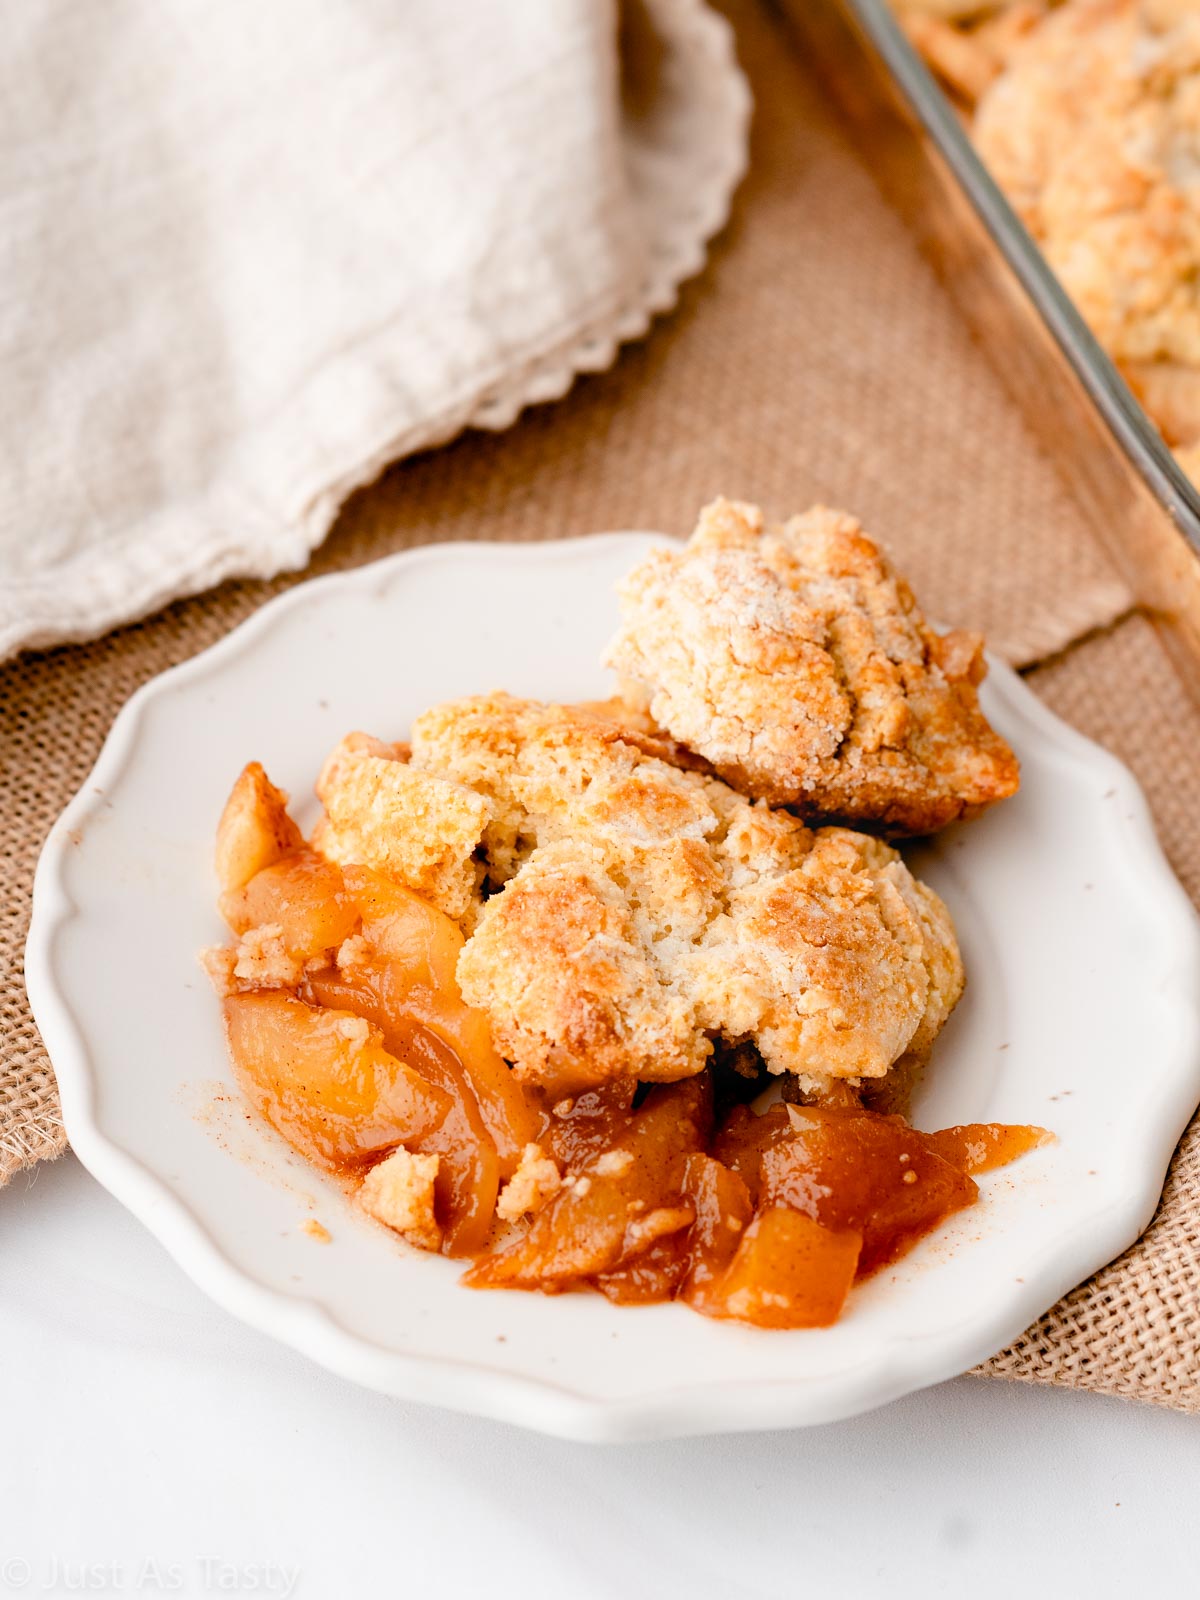 Serving of apple cobbler on a plate.